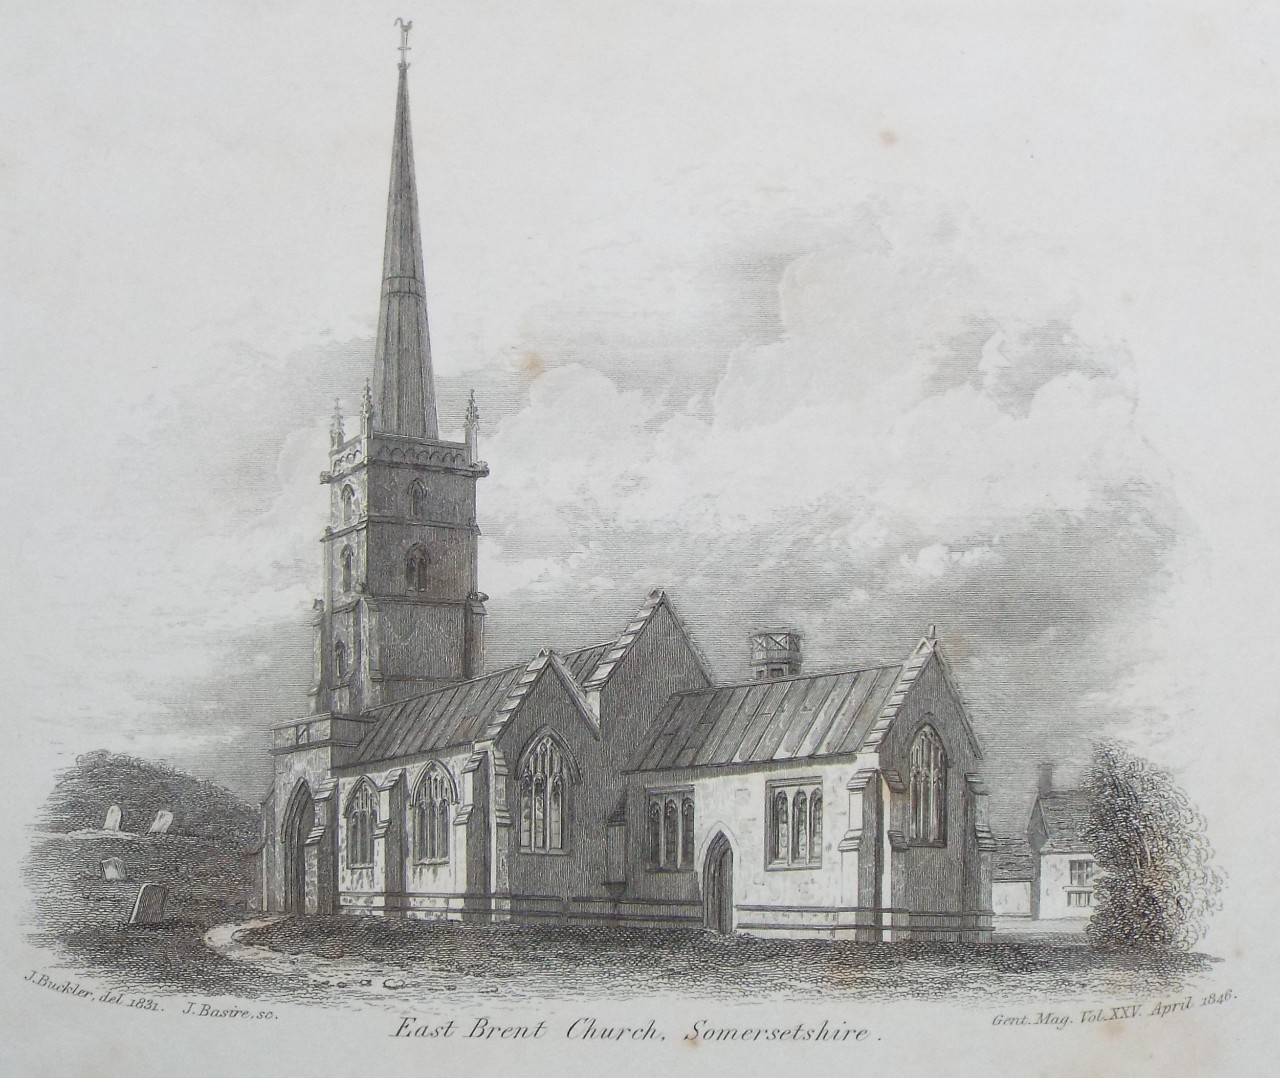 Print - East Brent Church, Somersetshire. - Basire